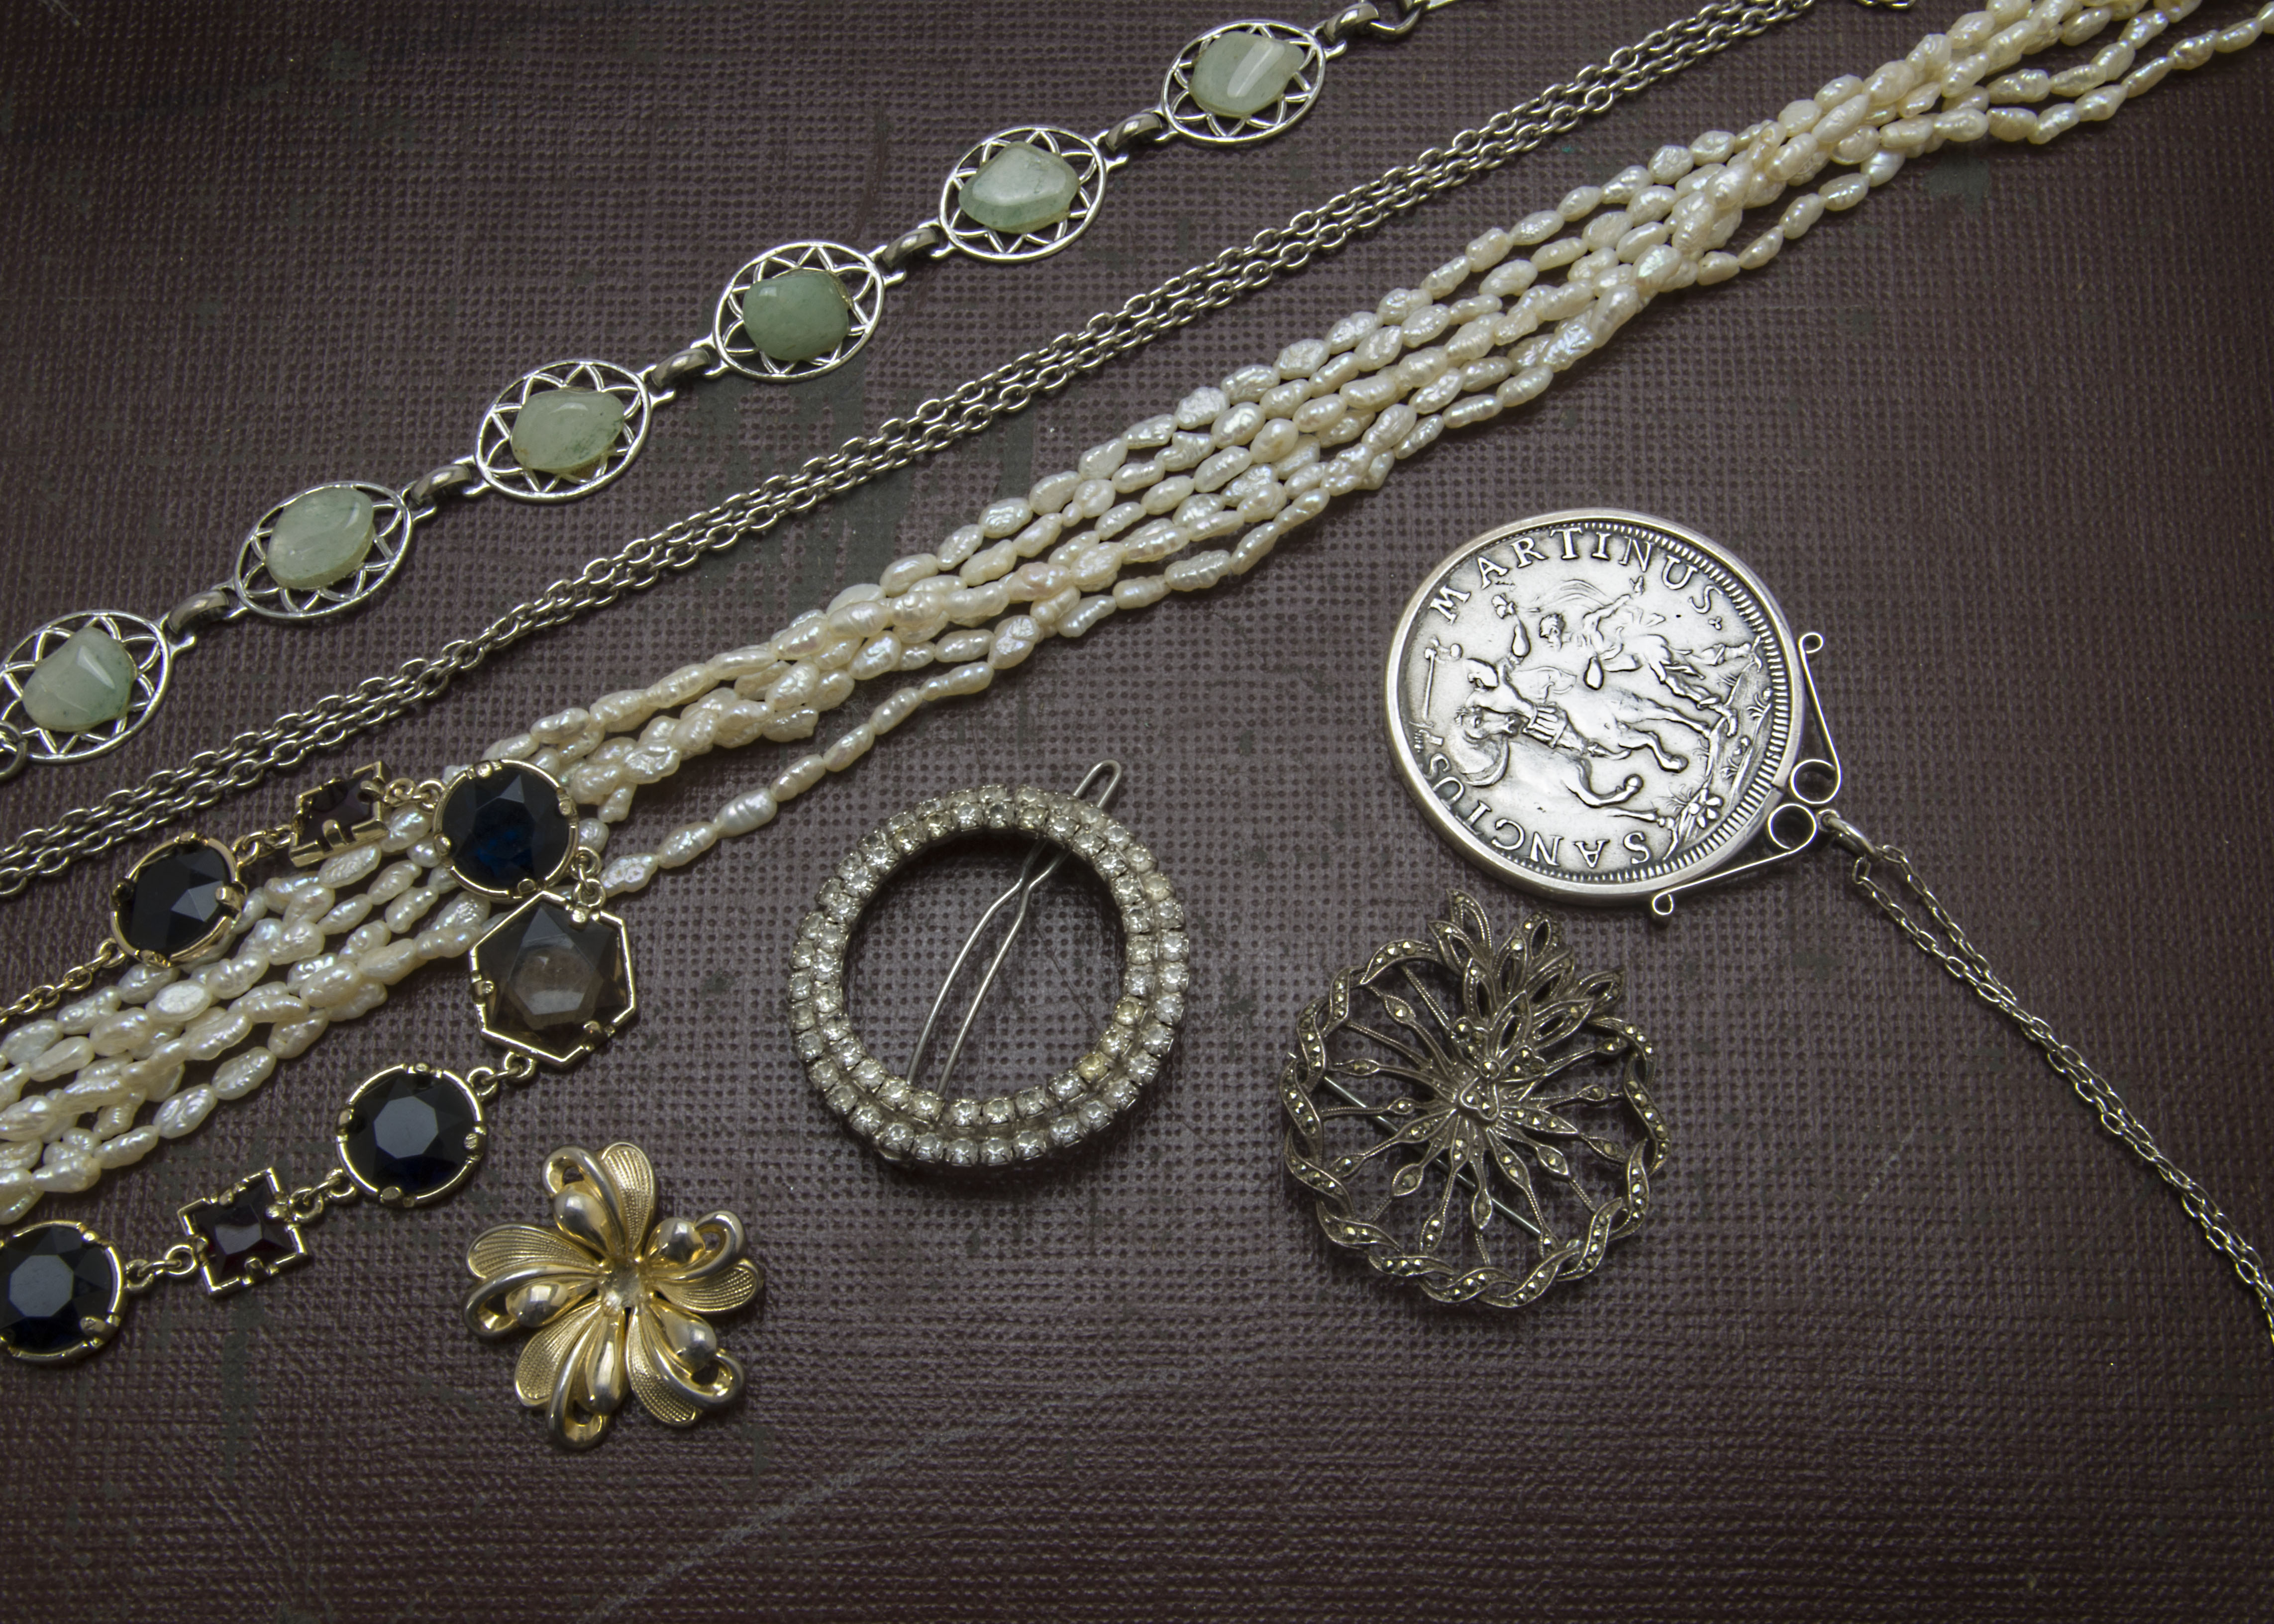 A collection of jewellery and jewellery boxes, including silver jewellery such as a brooch with